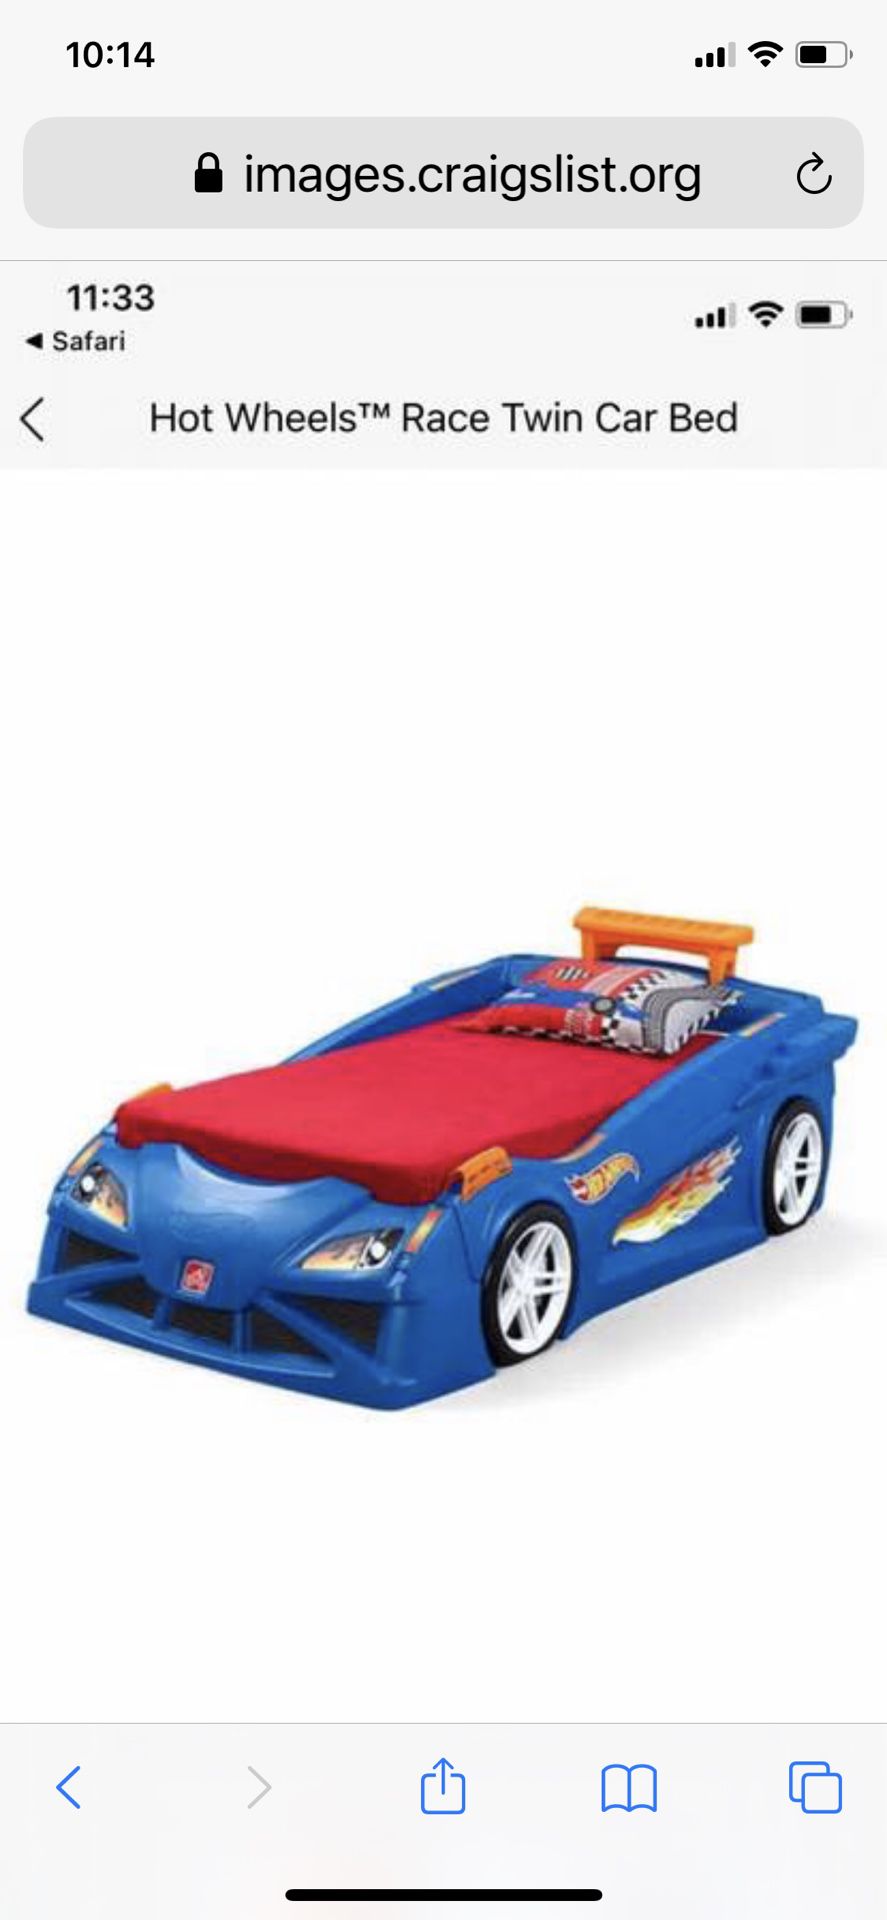 Hot wheels Car Bed, Mattress Not Included